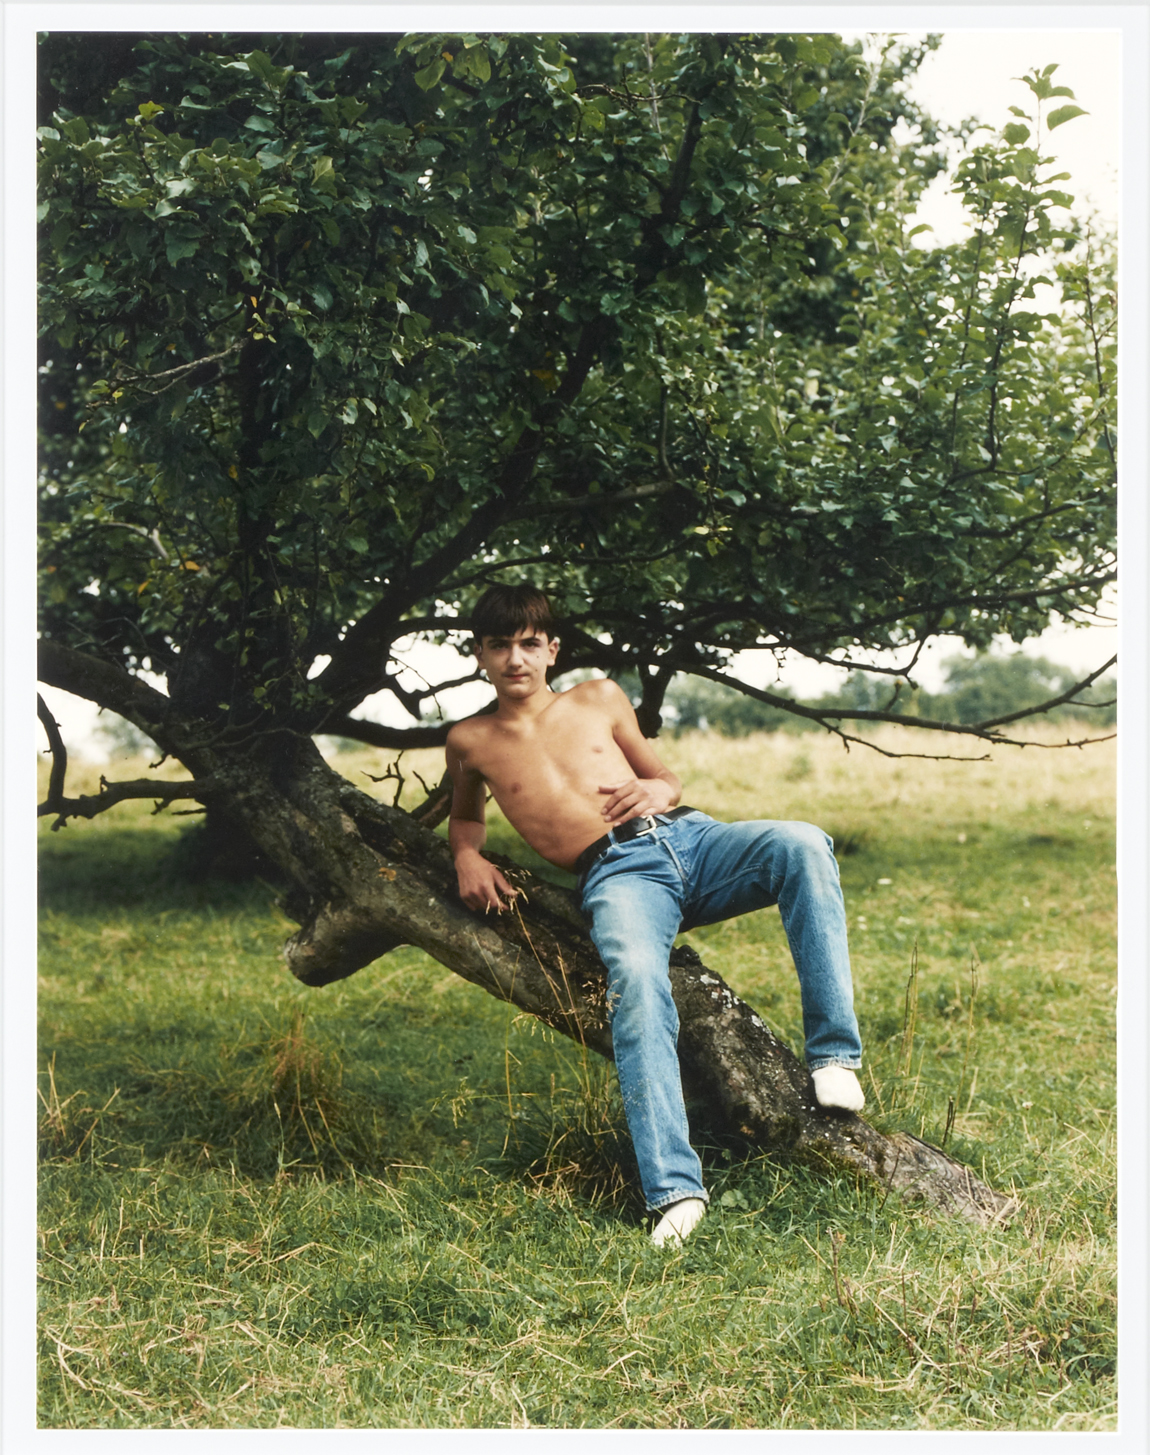 A color photograph shows a light-skinned adolescent boy wearing blue jeans and no shirt seated on a low, leaning tree in an open field.